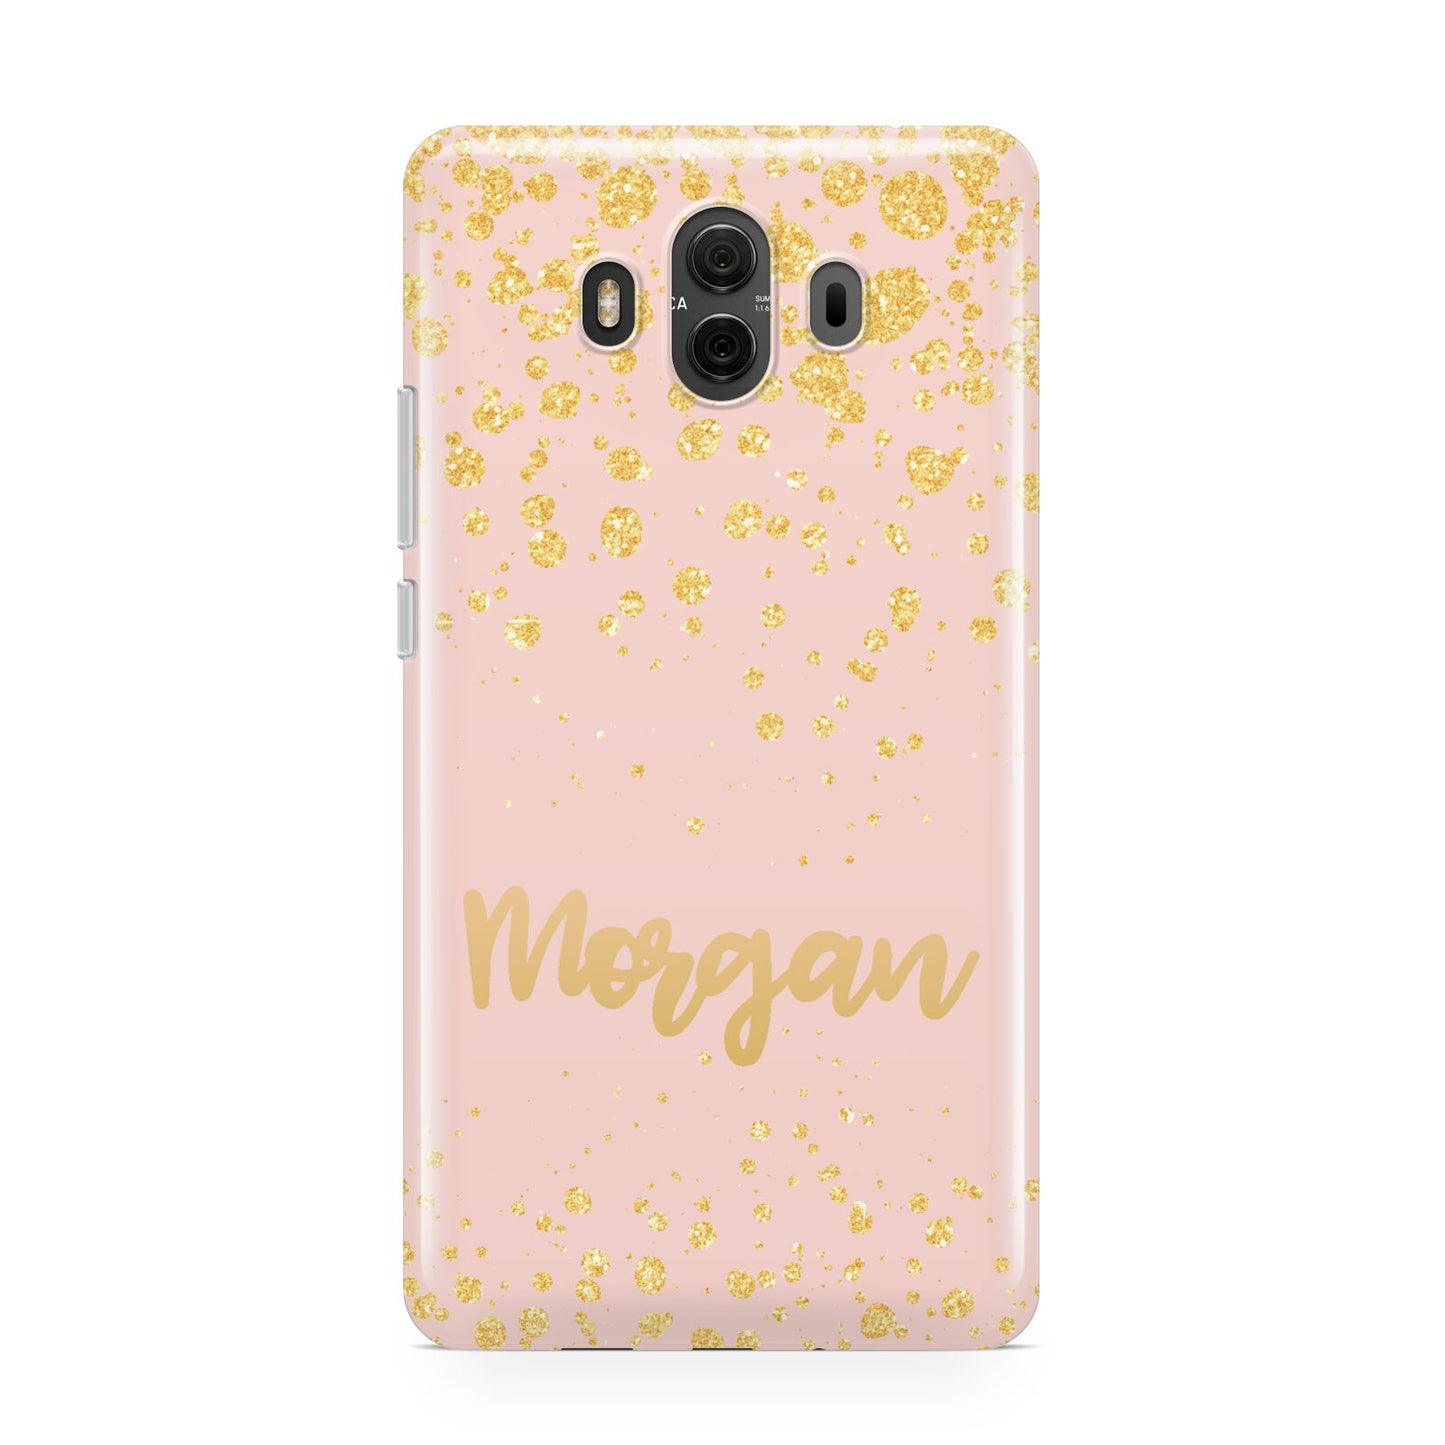 Personalised Pink Gold Splatter With Name Huawei Mate 10 Protective Phone Case